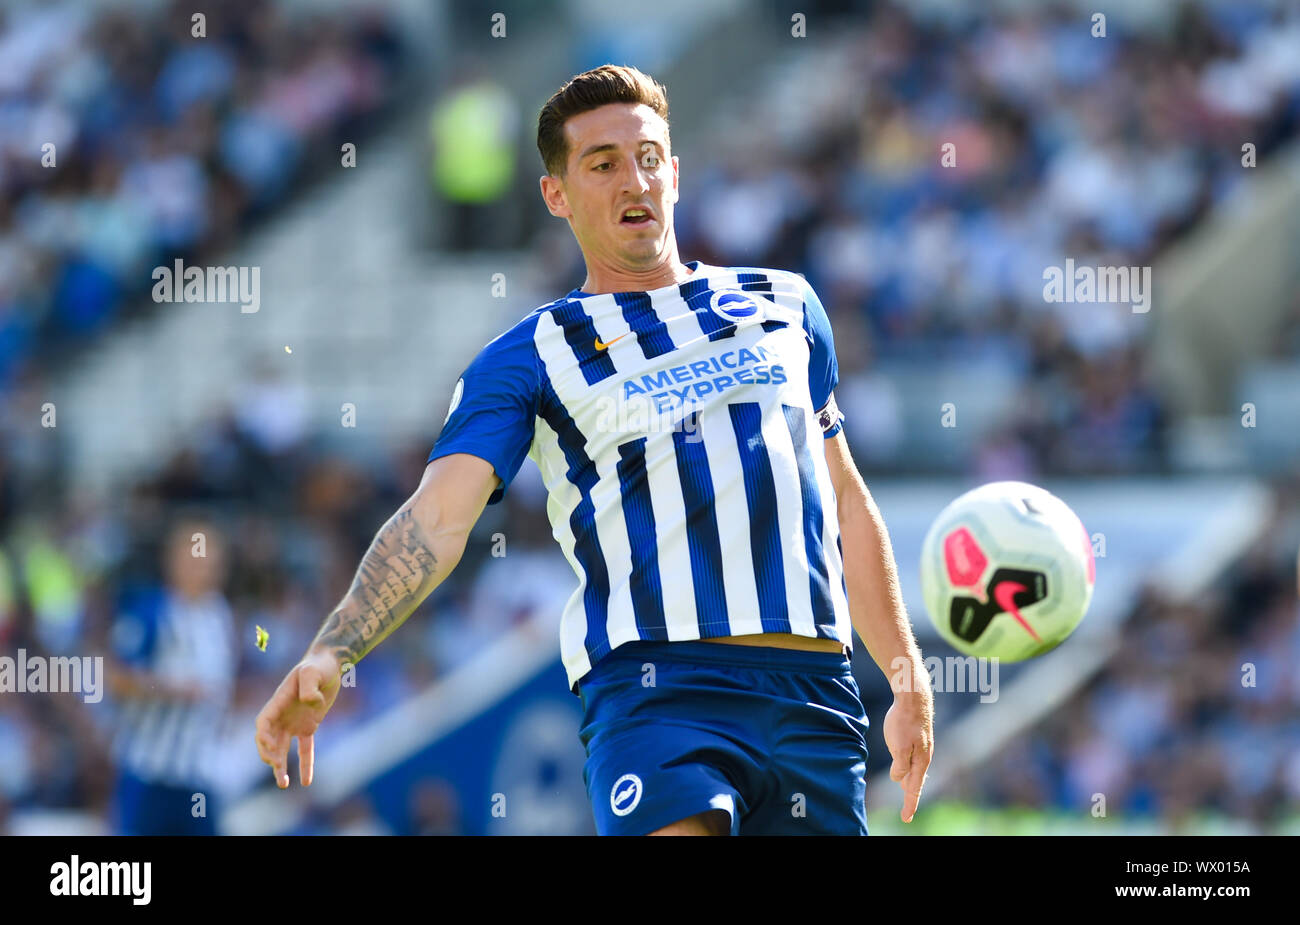 Lewis Dunk of Brighton during the Premier League match between Brighton and Hove Albion and Burnley at the American Express Community Stadium , Brighton , 14 September 2019 Editorial use only. No merchandising. For Football images FA and Premier League restrictions apply inc. no internet/mobile usage without FAPL license - for details contact Football Dataco Stock Photo